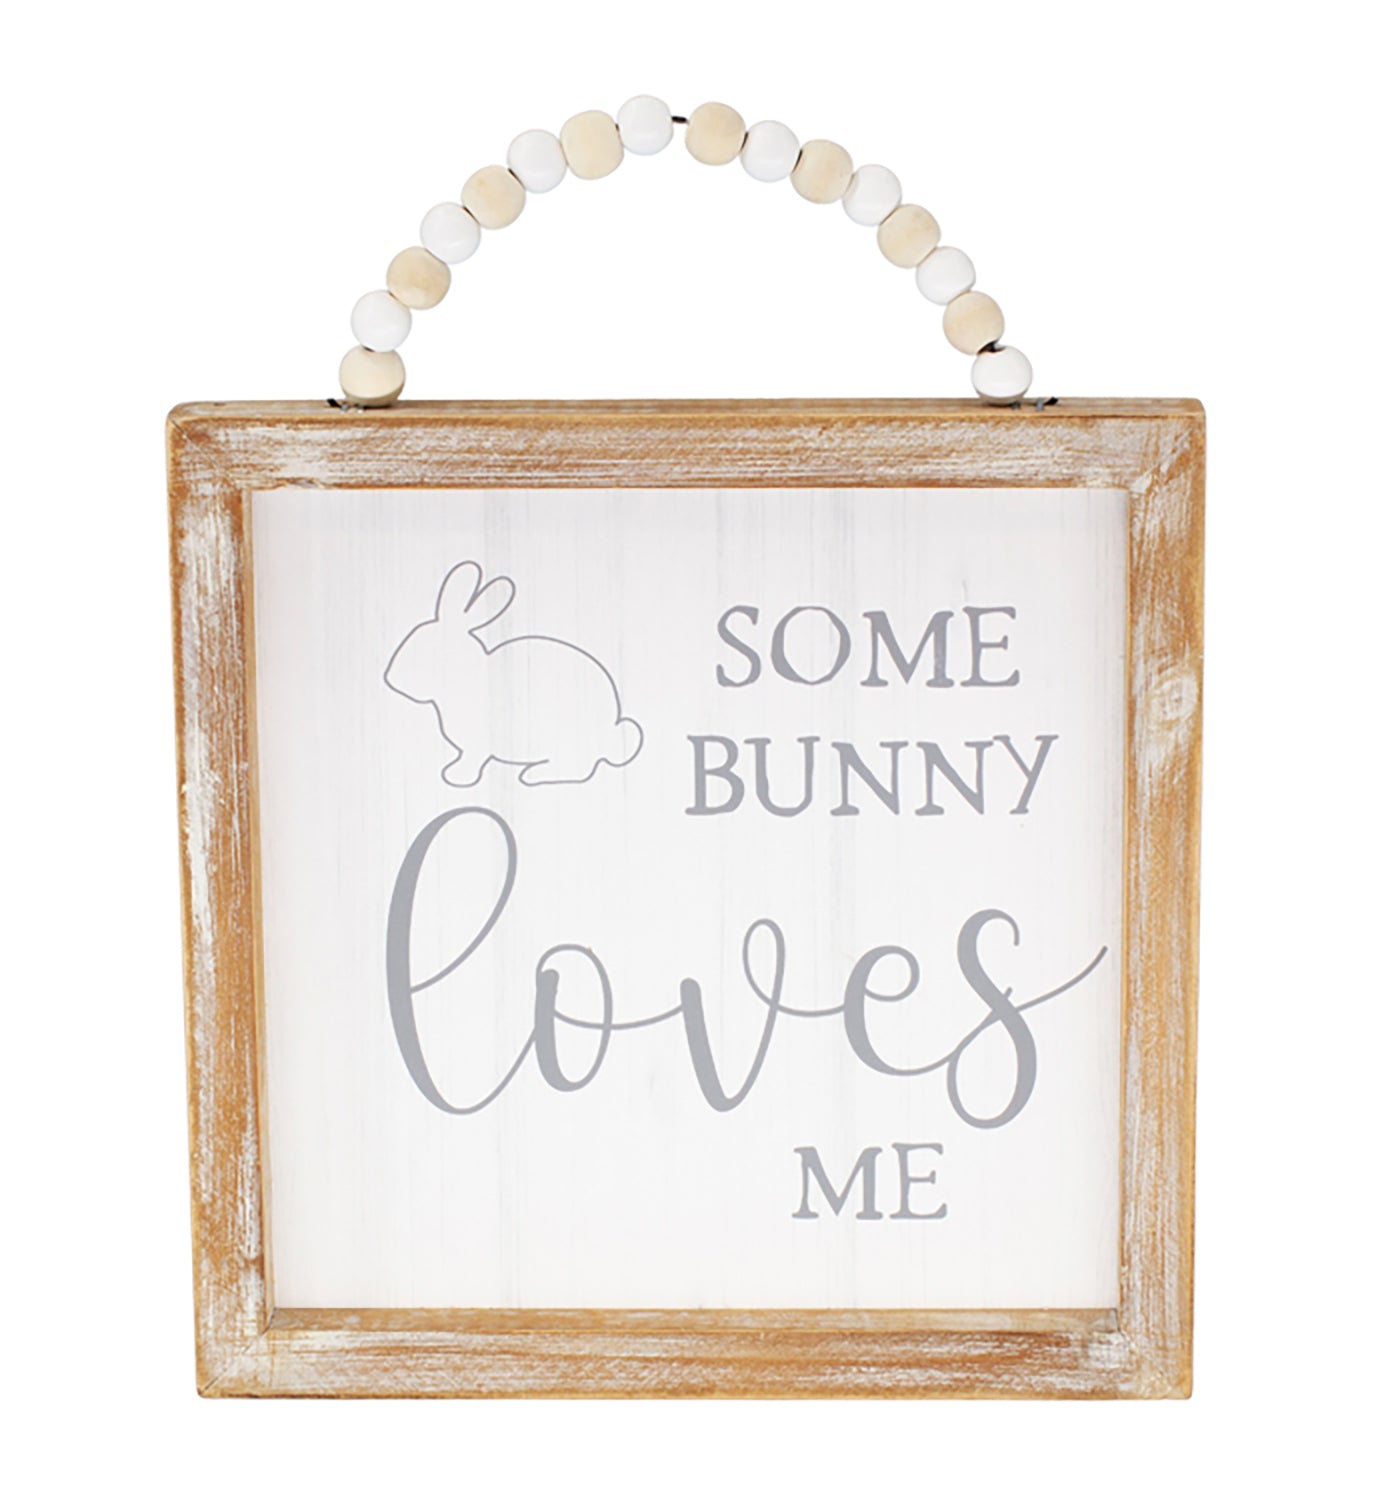 "Some Bunny Loves Me" sign